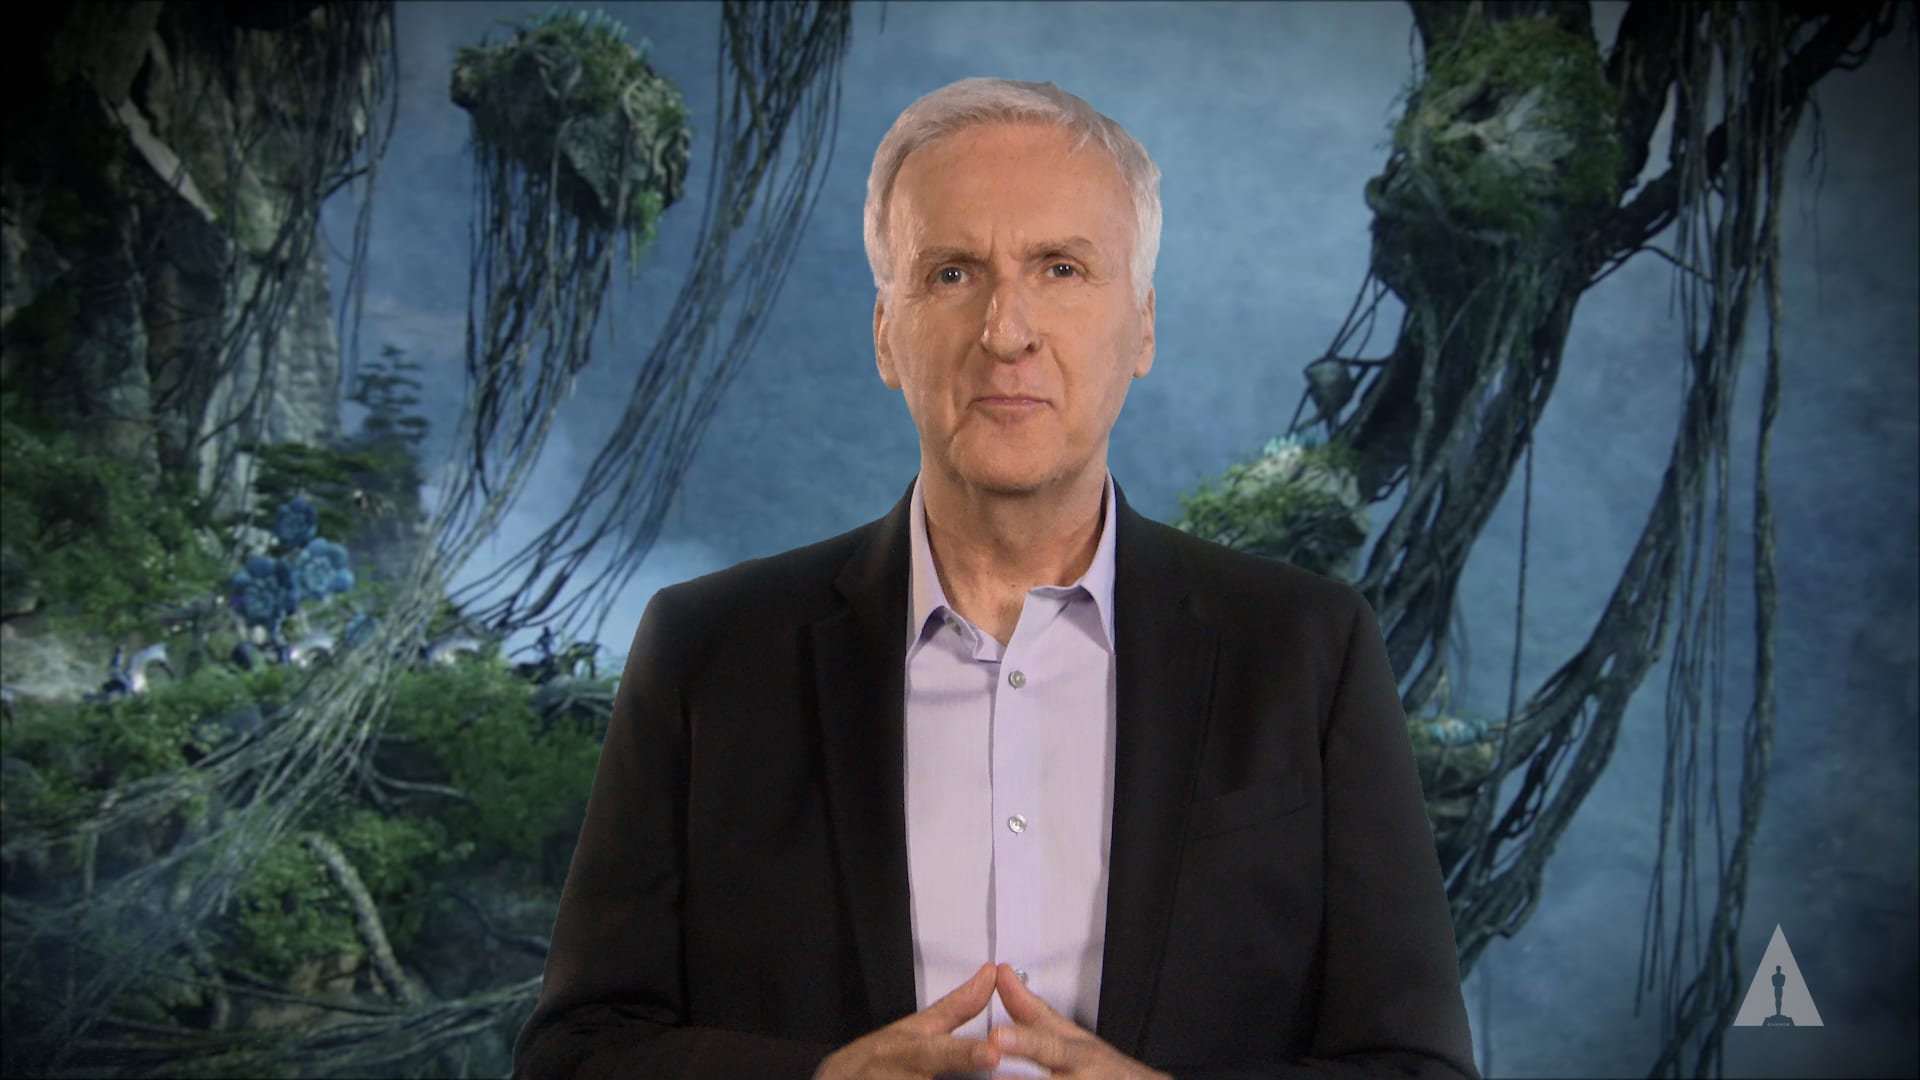 James Cameron & Avatar 2 Cast Lived In A Rainforest “For A Few Days” To Train For The Movie